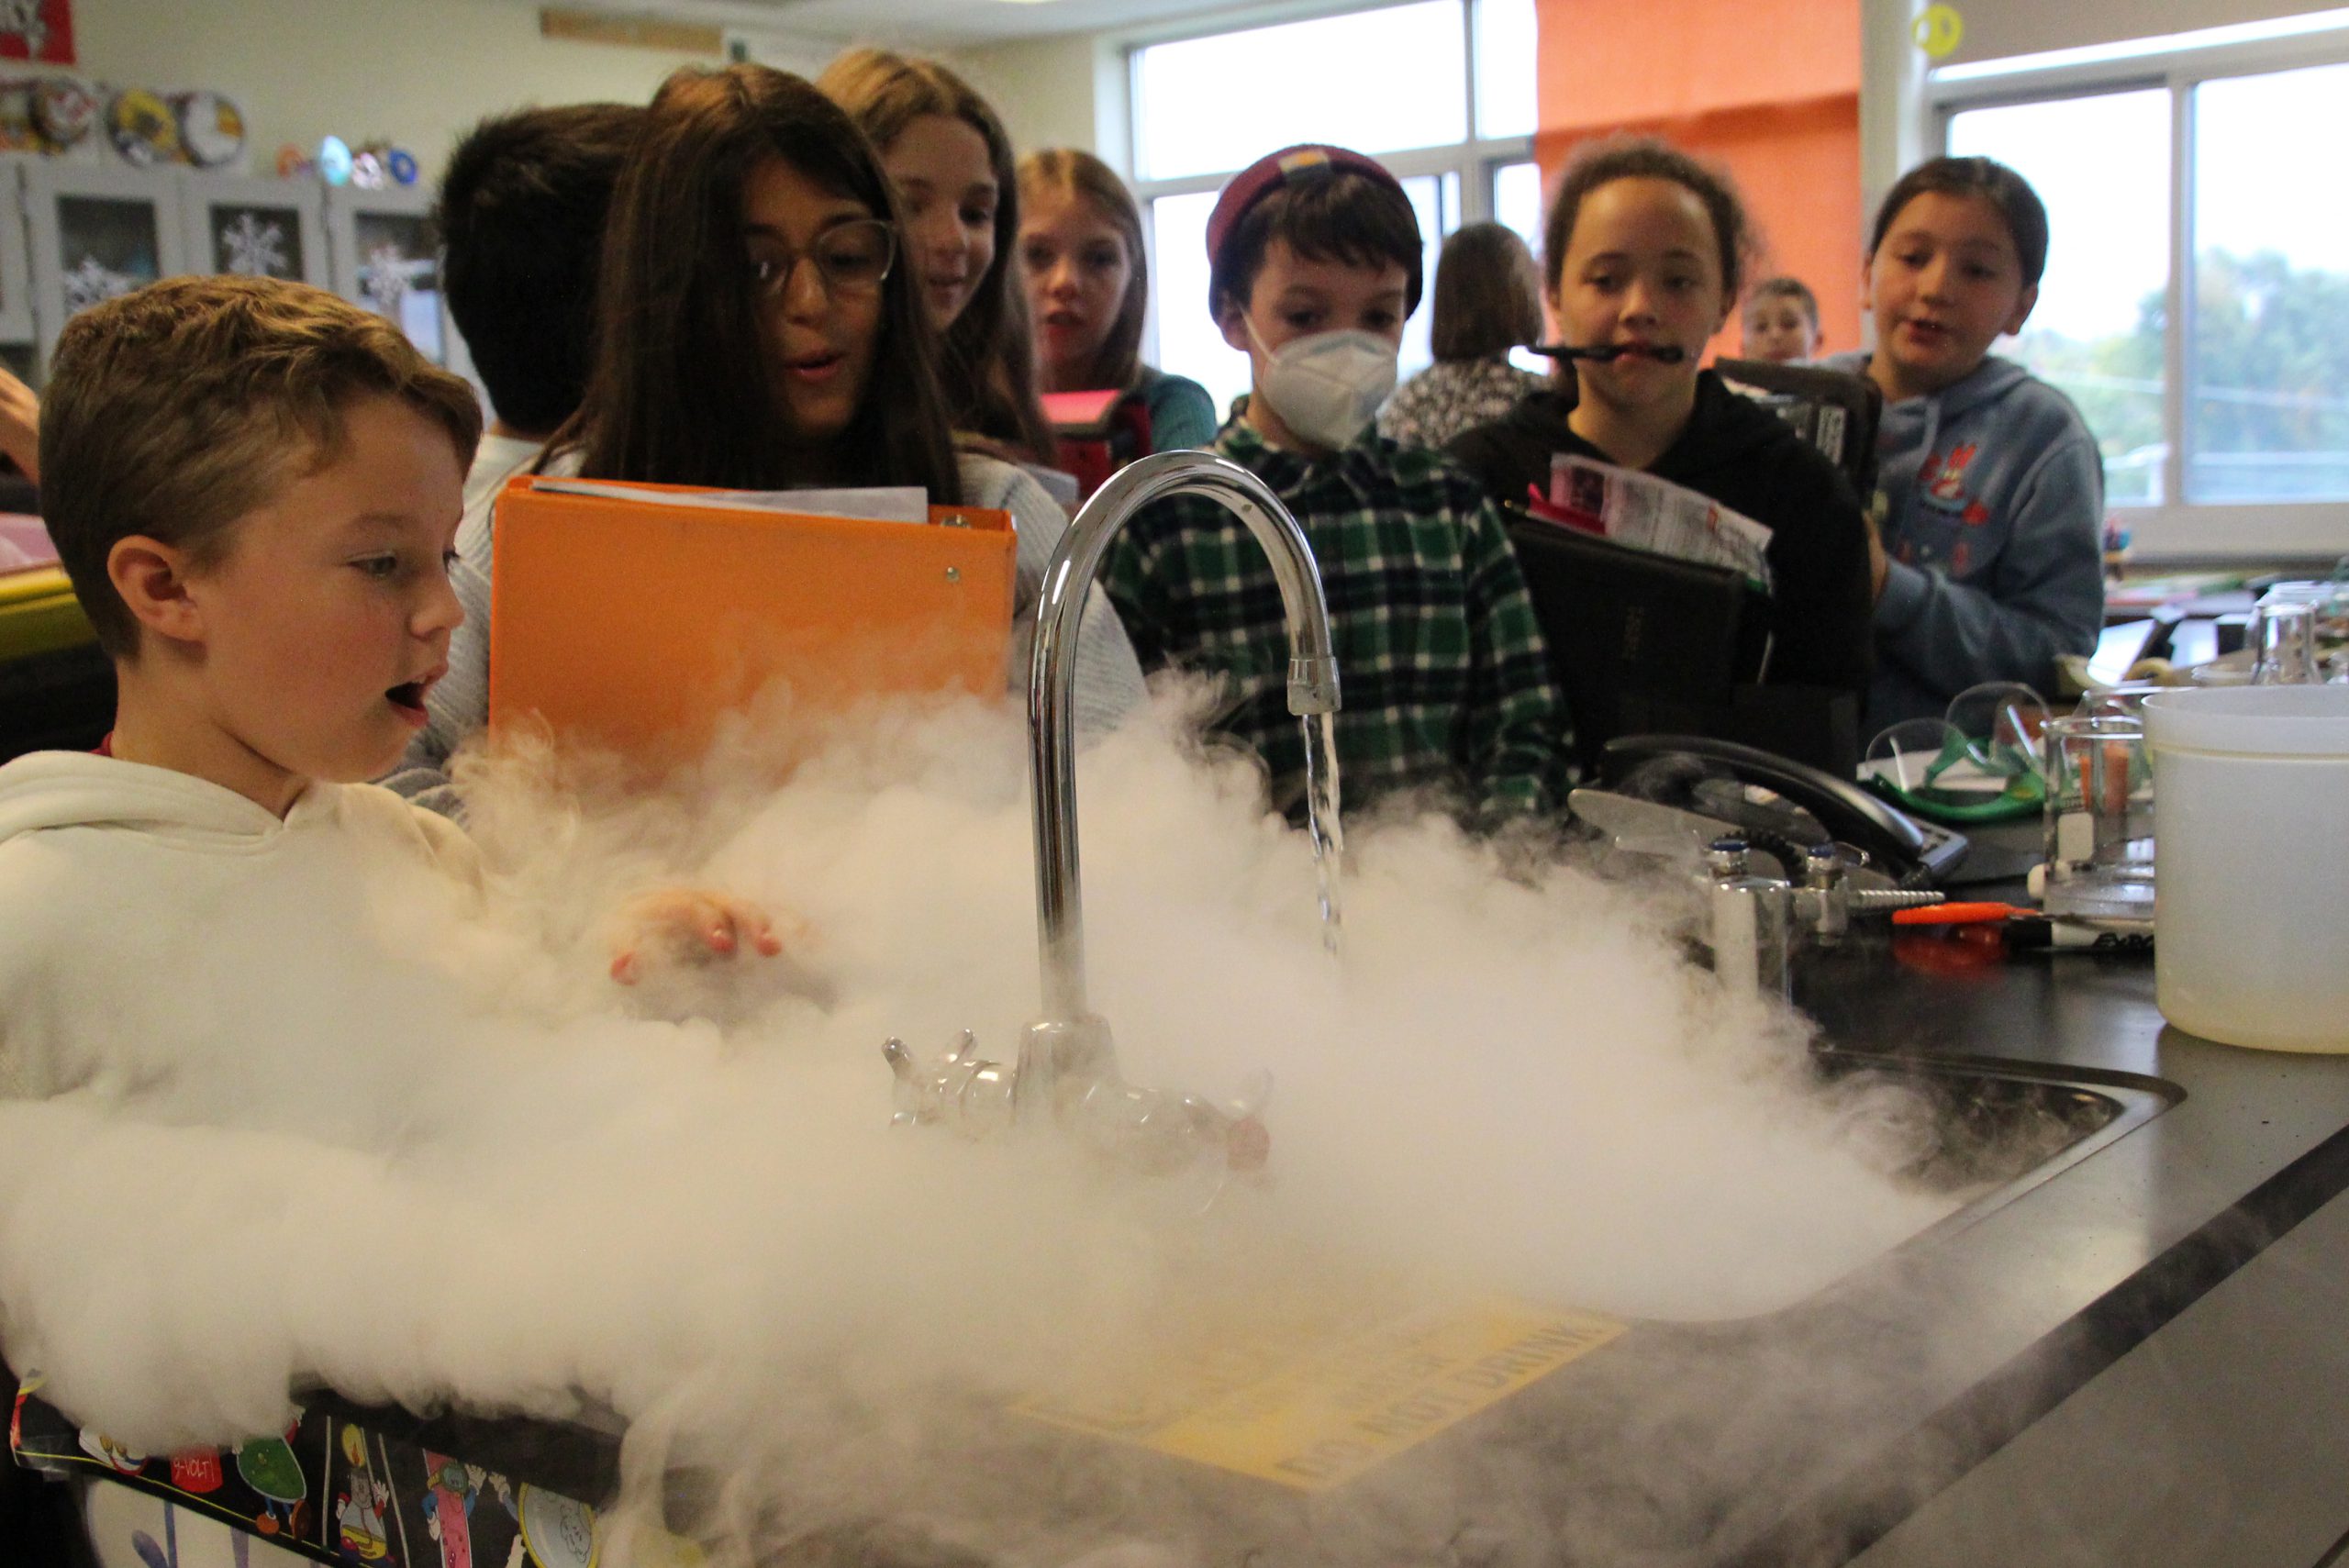 Middle school students stand next to a steamy science project.